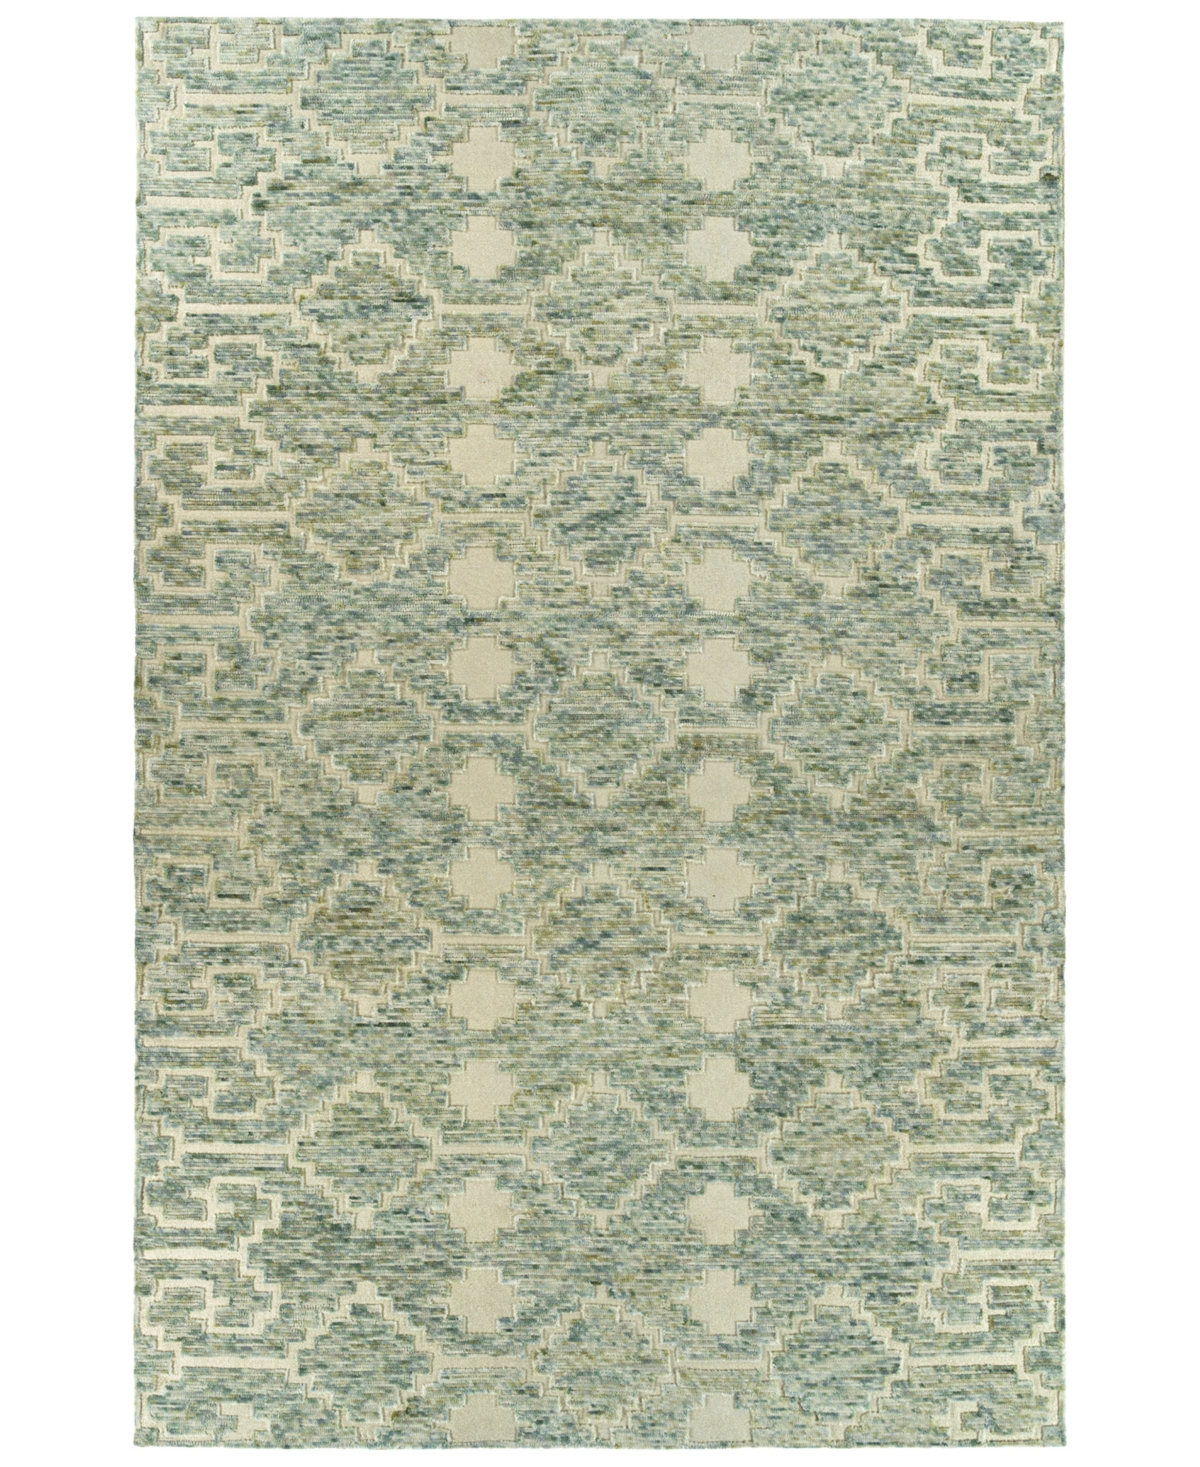 Kaleen Radiance RAD97 3'6in x 5'6in Area Rug - Green